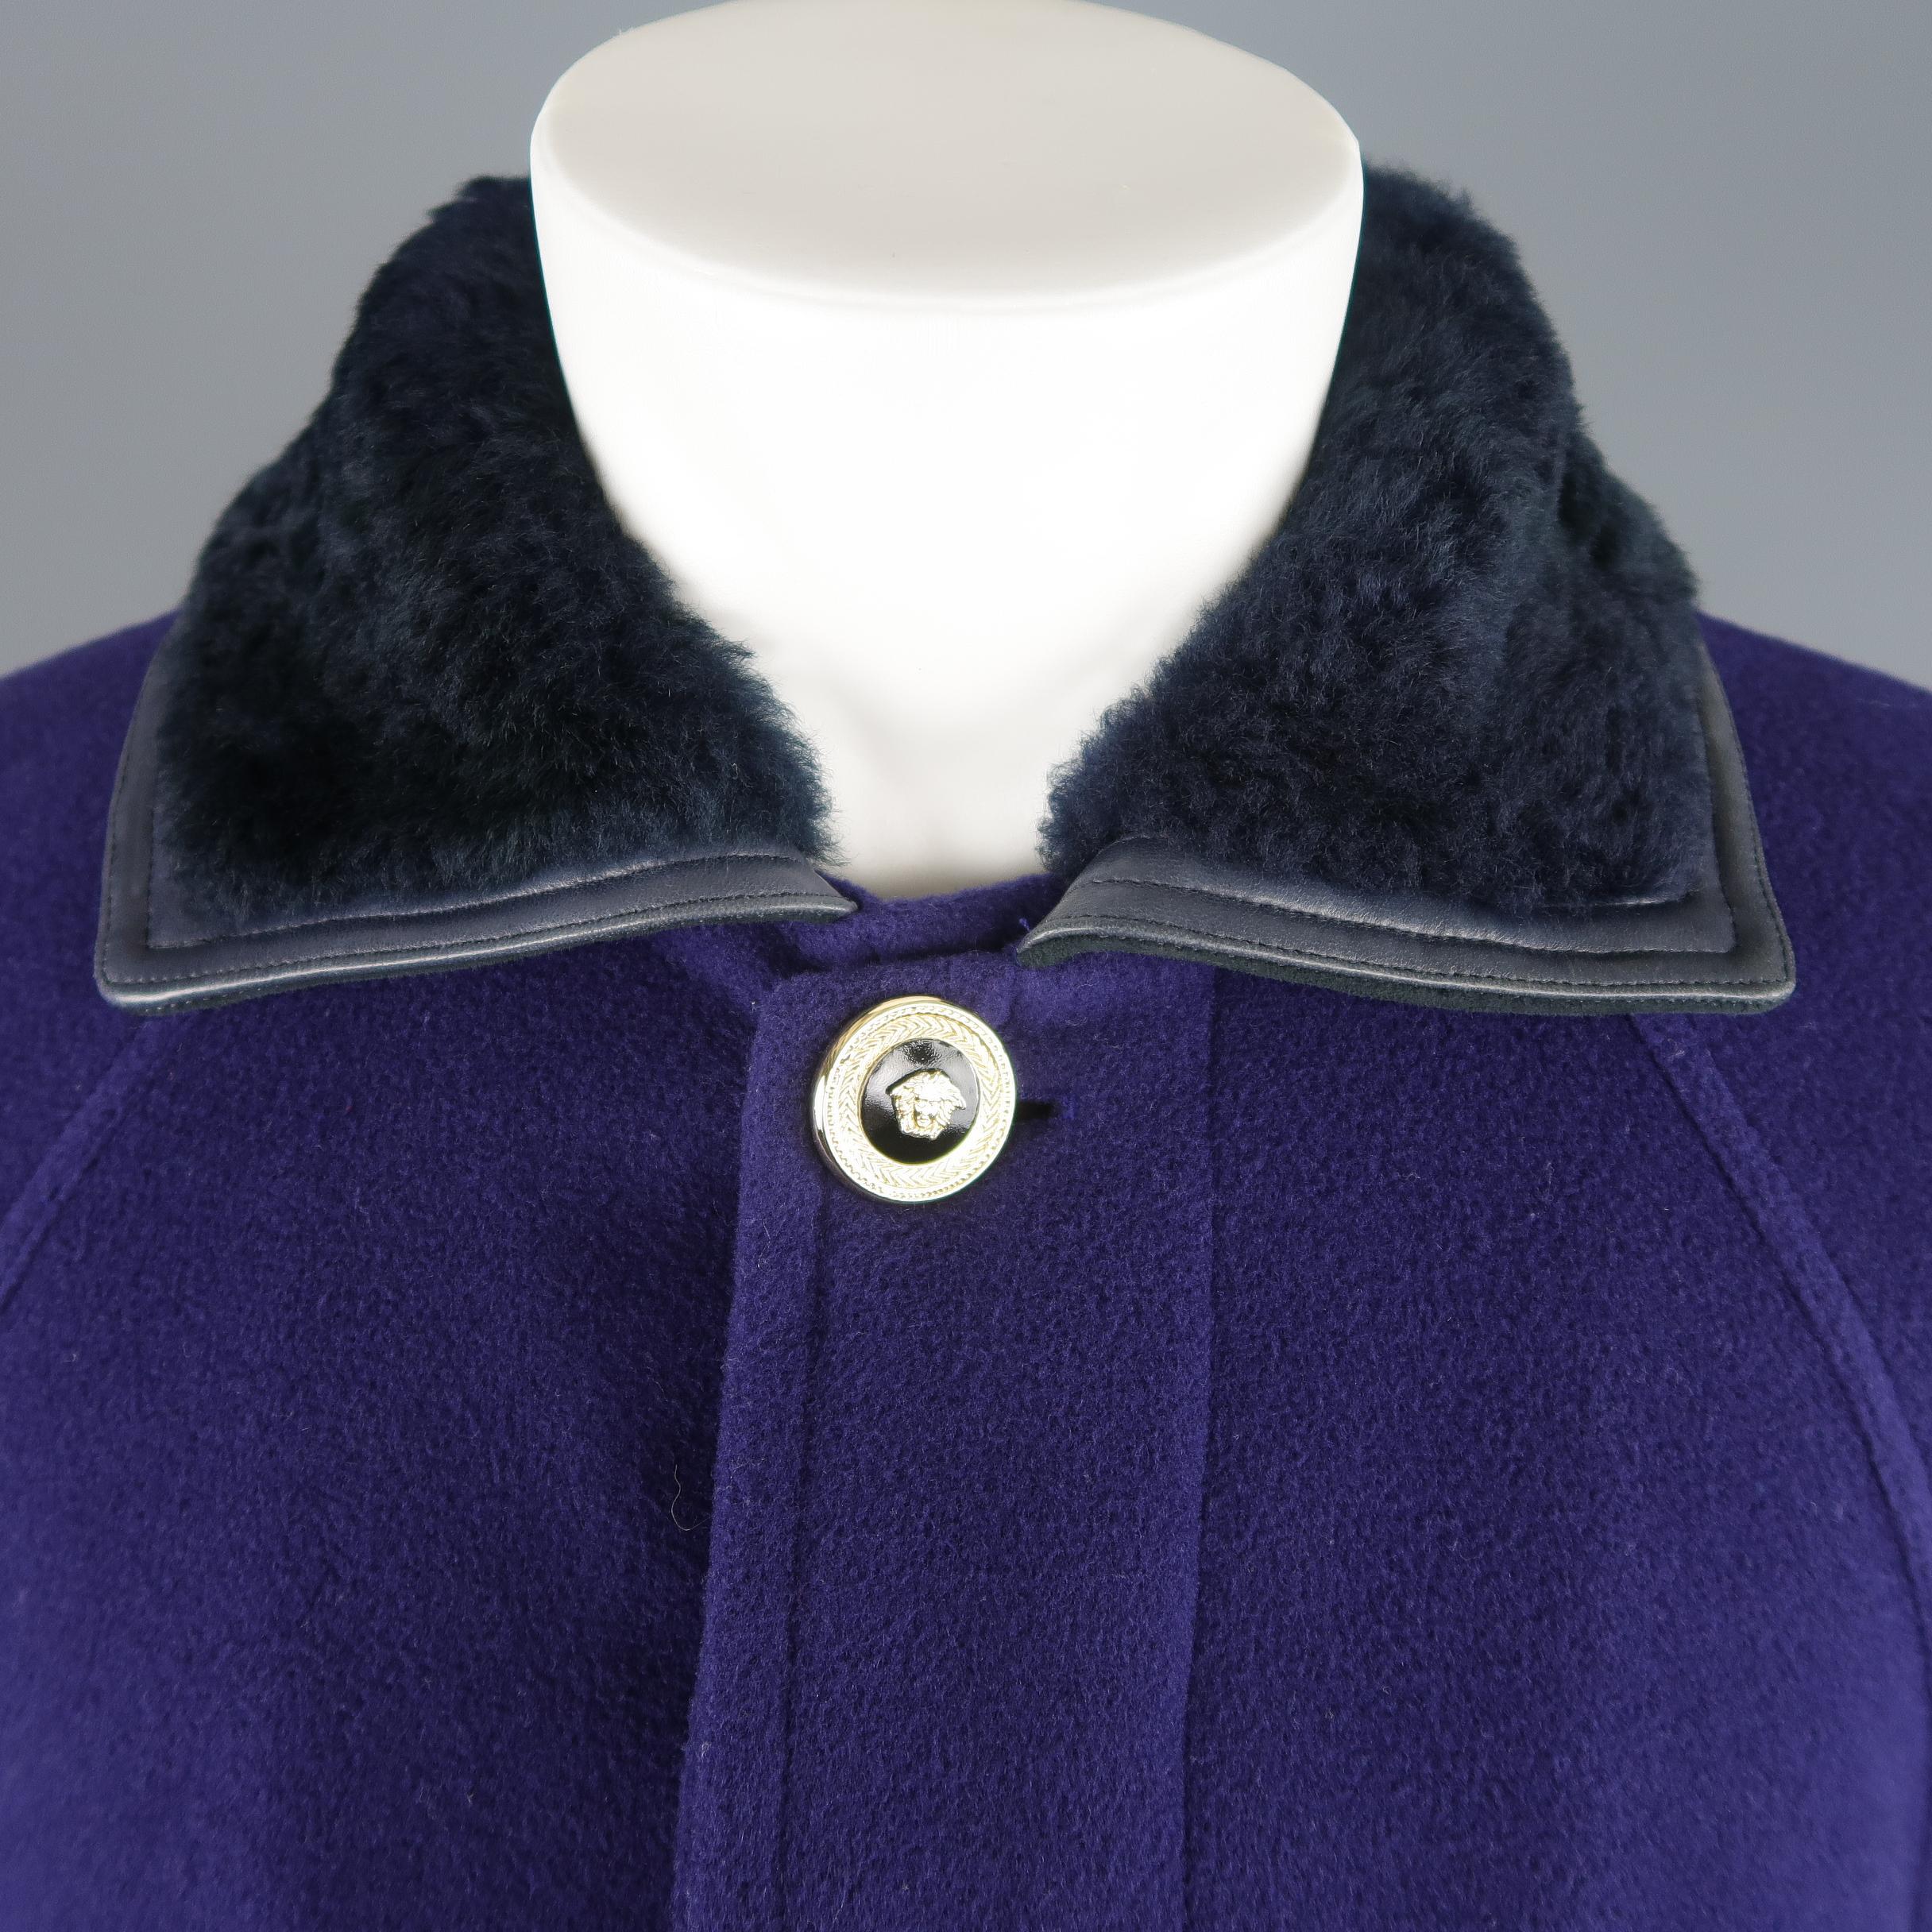 Vintage 1990's Gianni Versace coat comes in purple wool felt with a hidden placket button closure, gold tone enamel Medusa buttons, raglan sleeves, quilted back belt, and leather trimmed shearling fur collar. Made in Italy.
 
Good Pre-Owned